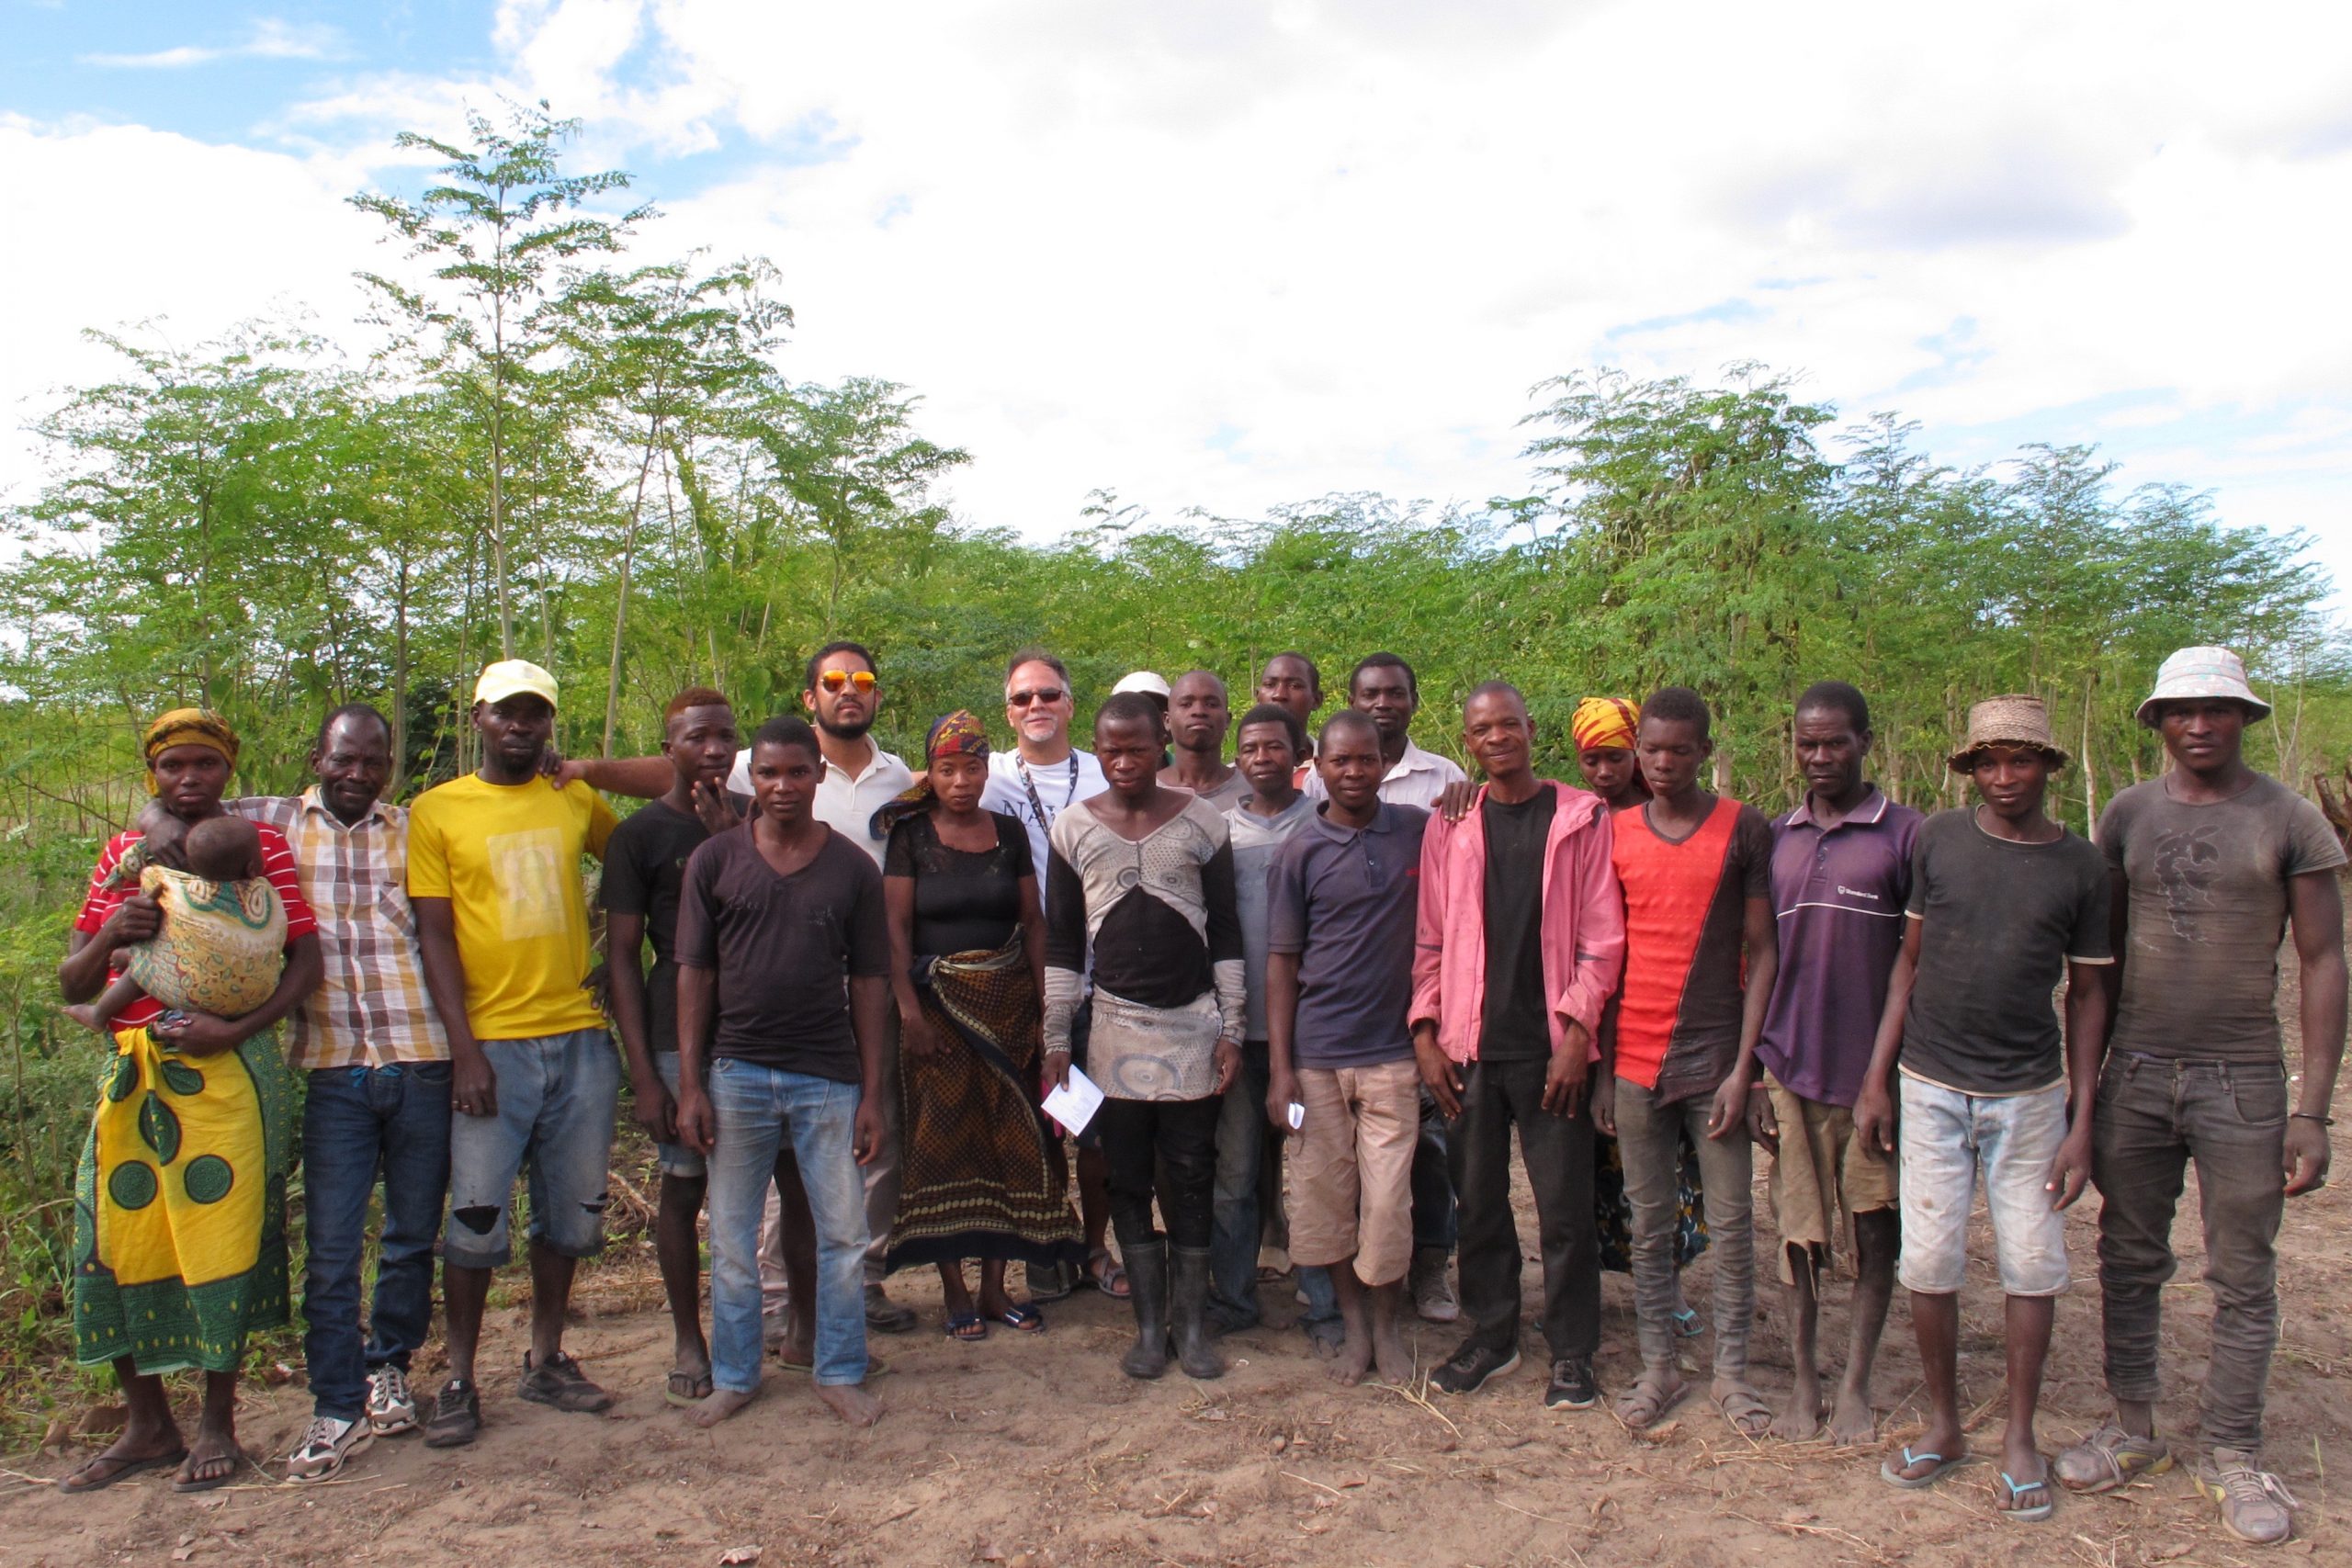 Rui Pereira (centre, back) and the Ekithi team in the moringa fields of Mozambique